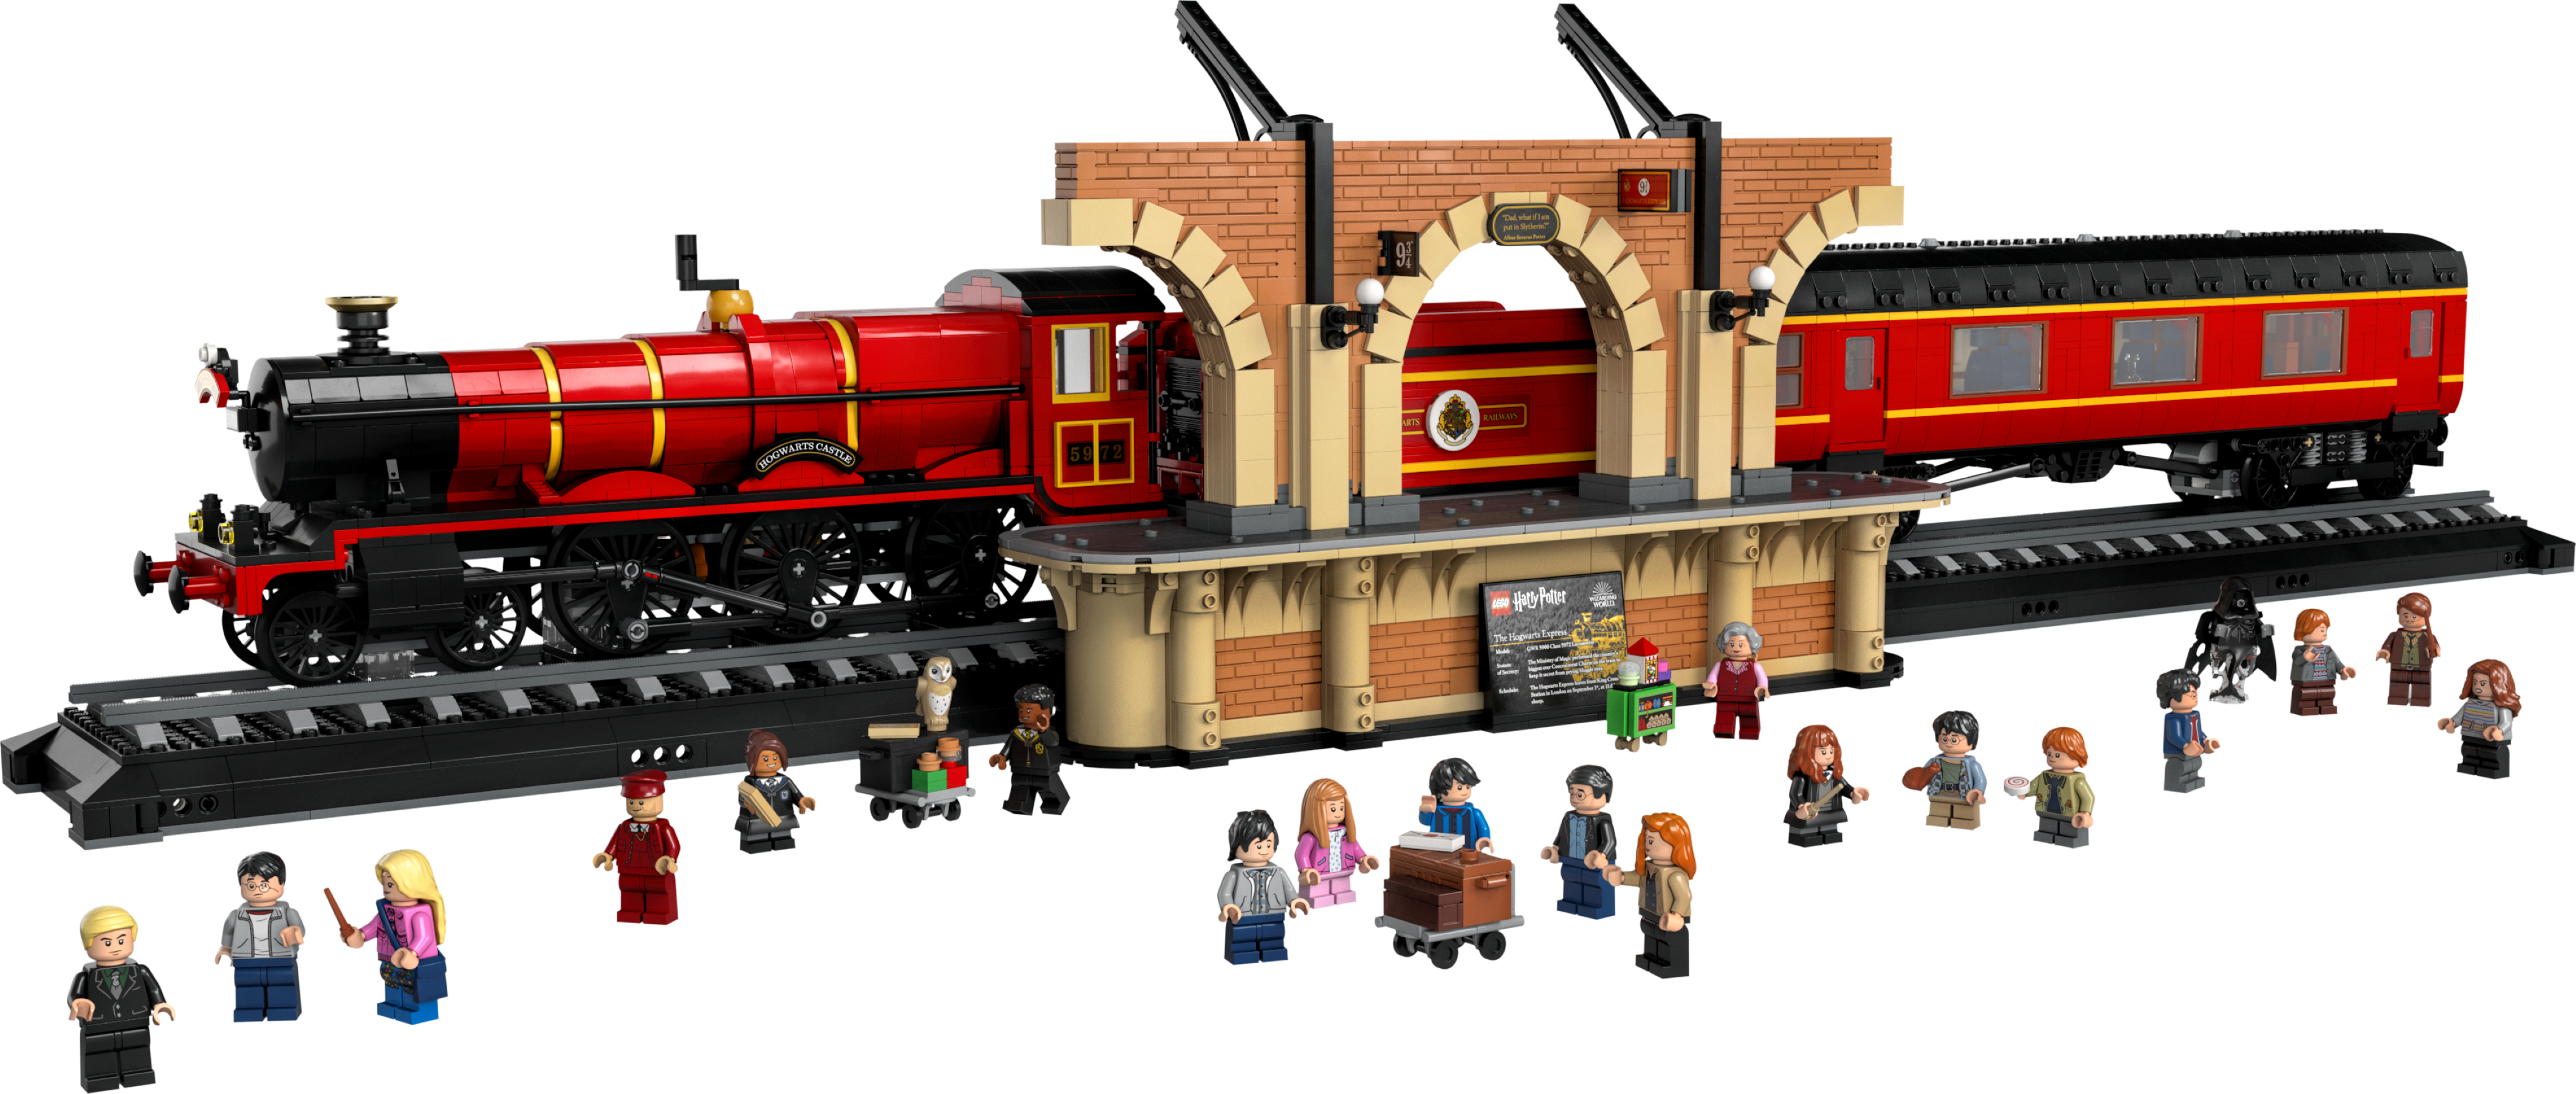 Hogwarts Express™ – Collectors' Edition 76405 | Harry Potter™ Buy online at the Official Shop US